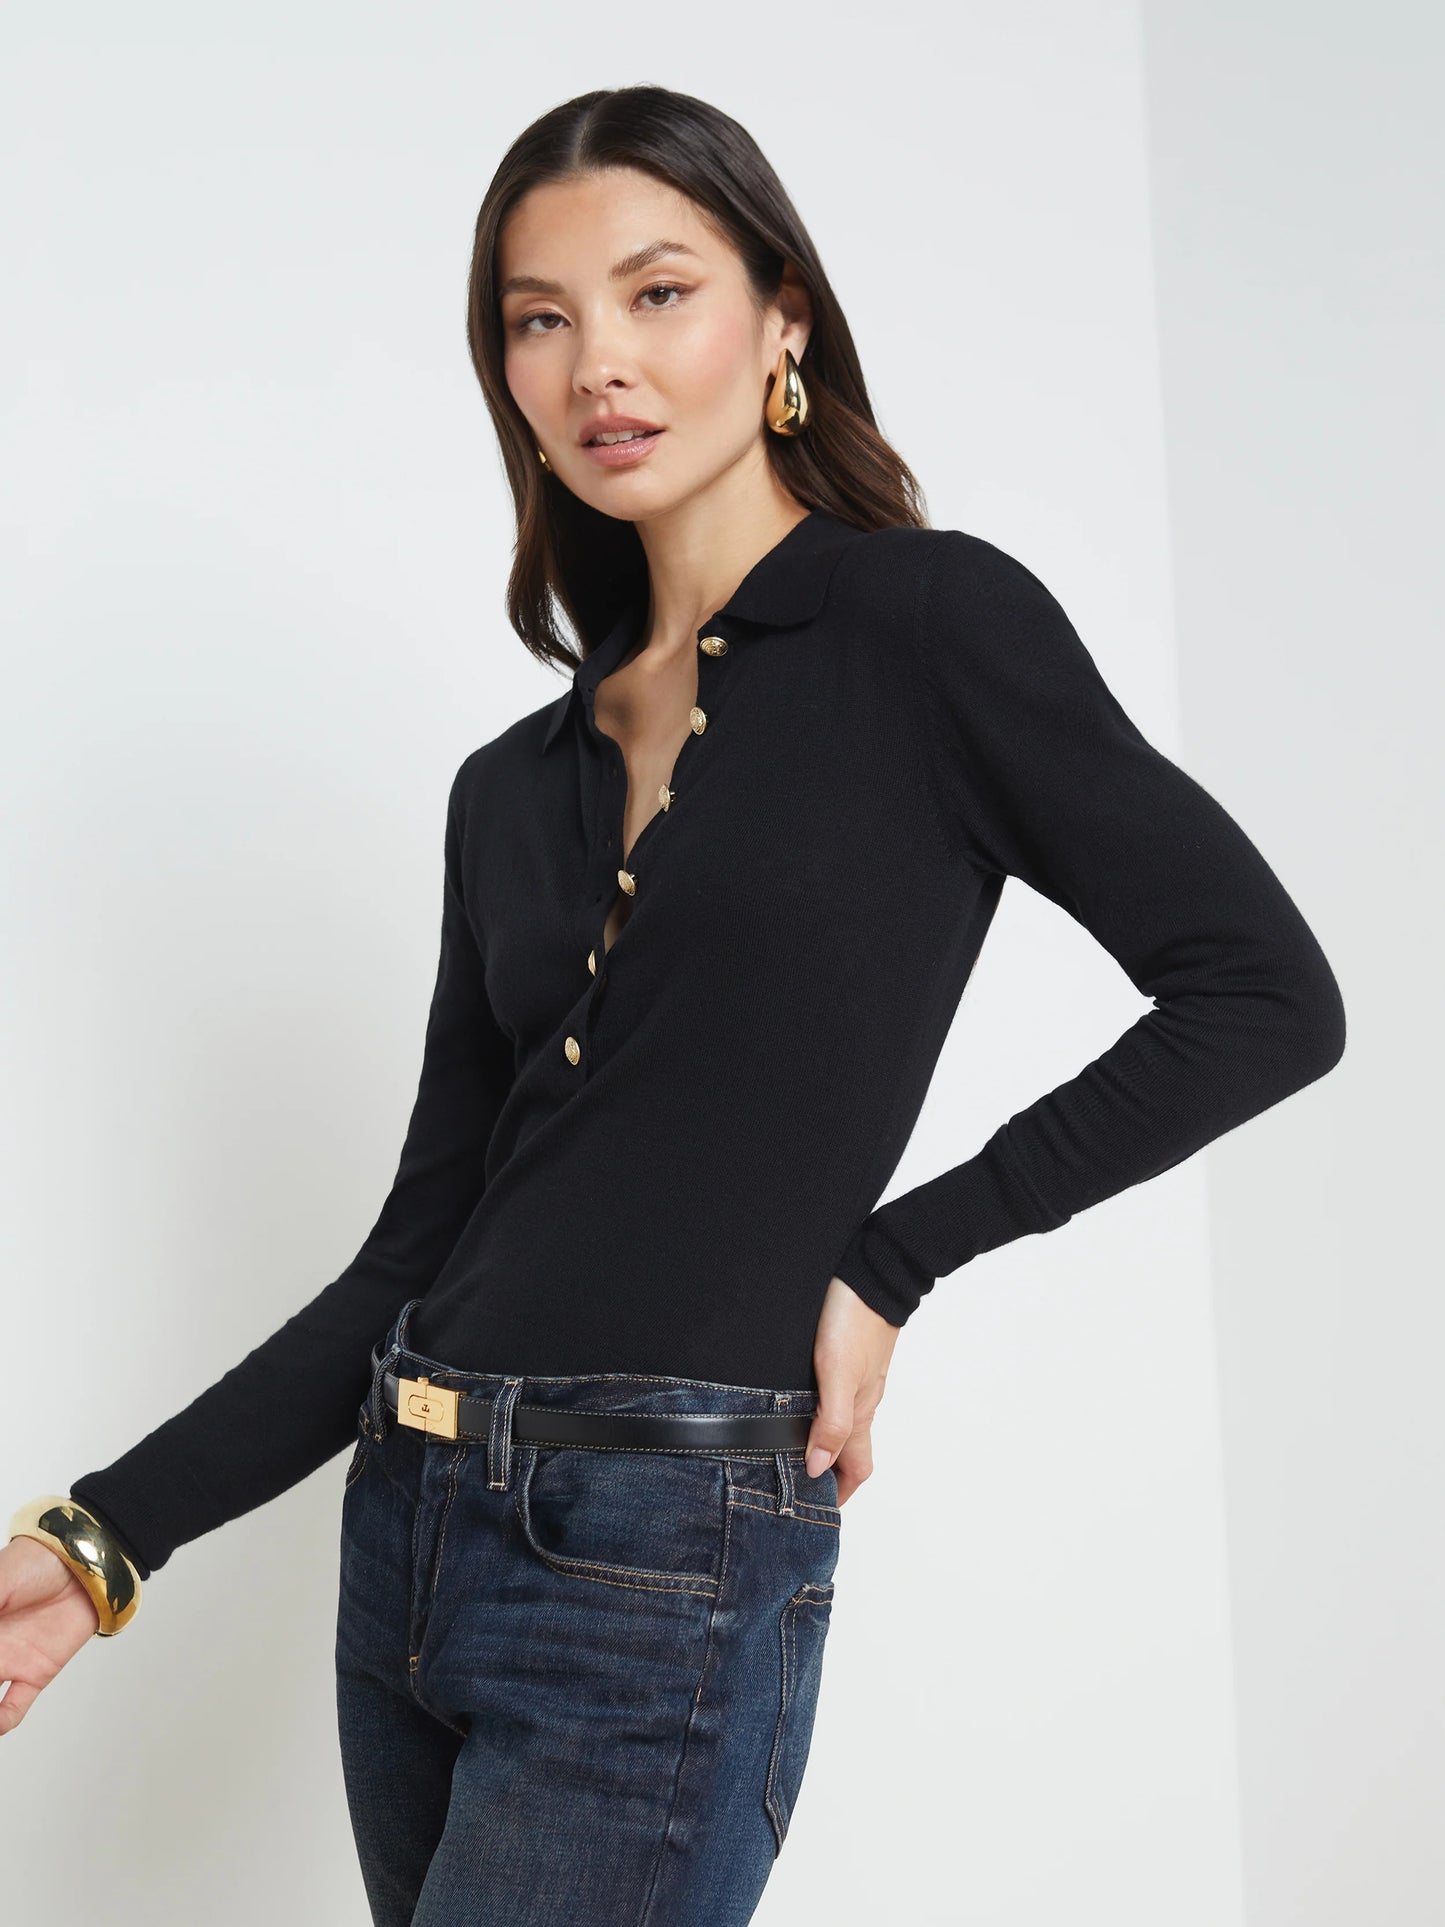 STERLING COLLARED SWEATER -  BLACK/GOLD